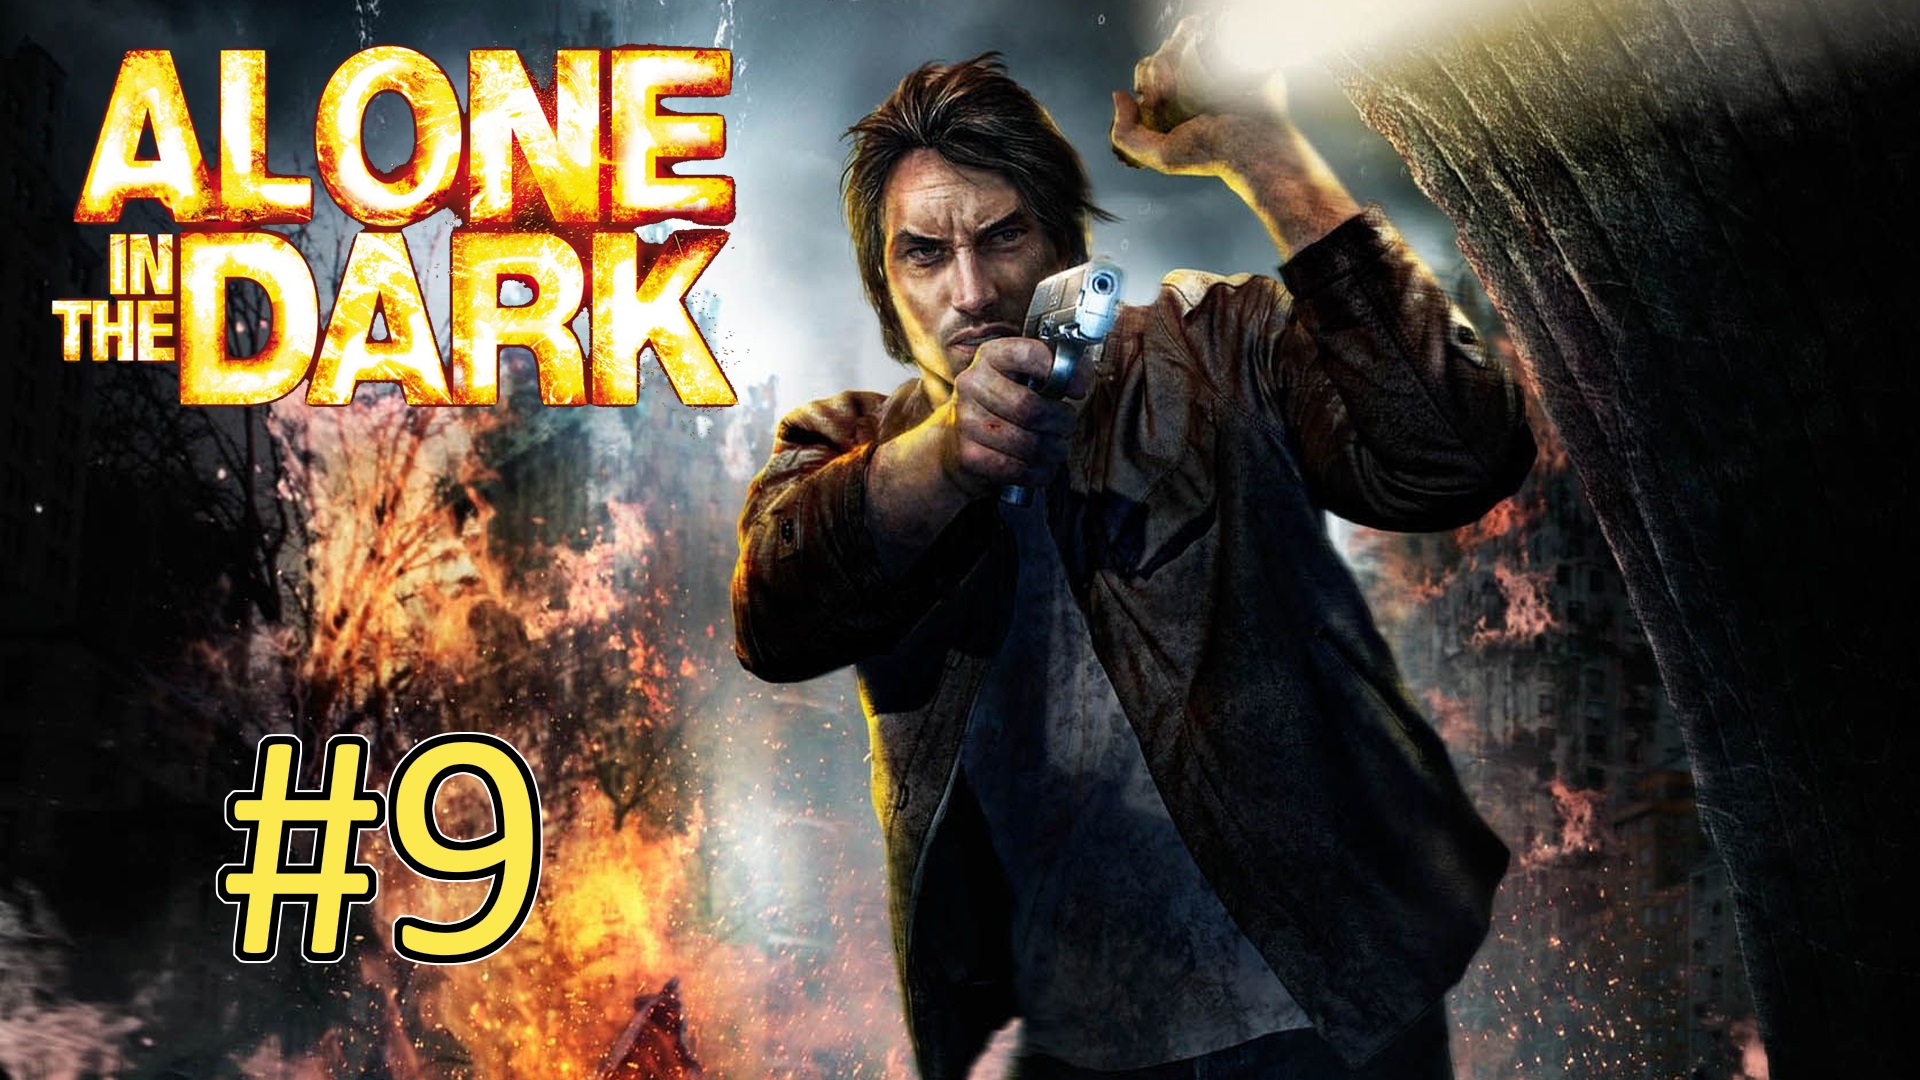 Прохождение игры alone in the dark 2024. Alone in the Dark 3. Alone in the Dark 4 the New Nightmare. Alone in the Dark ps2.